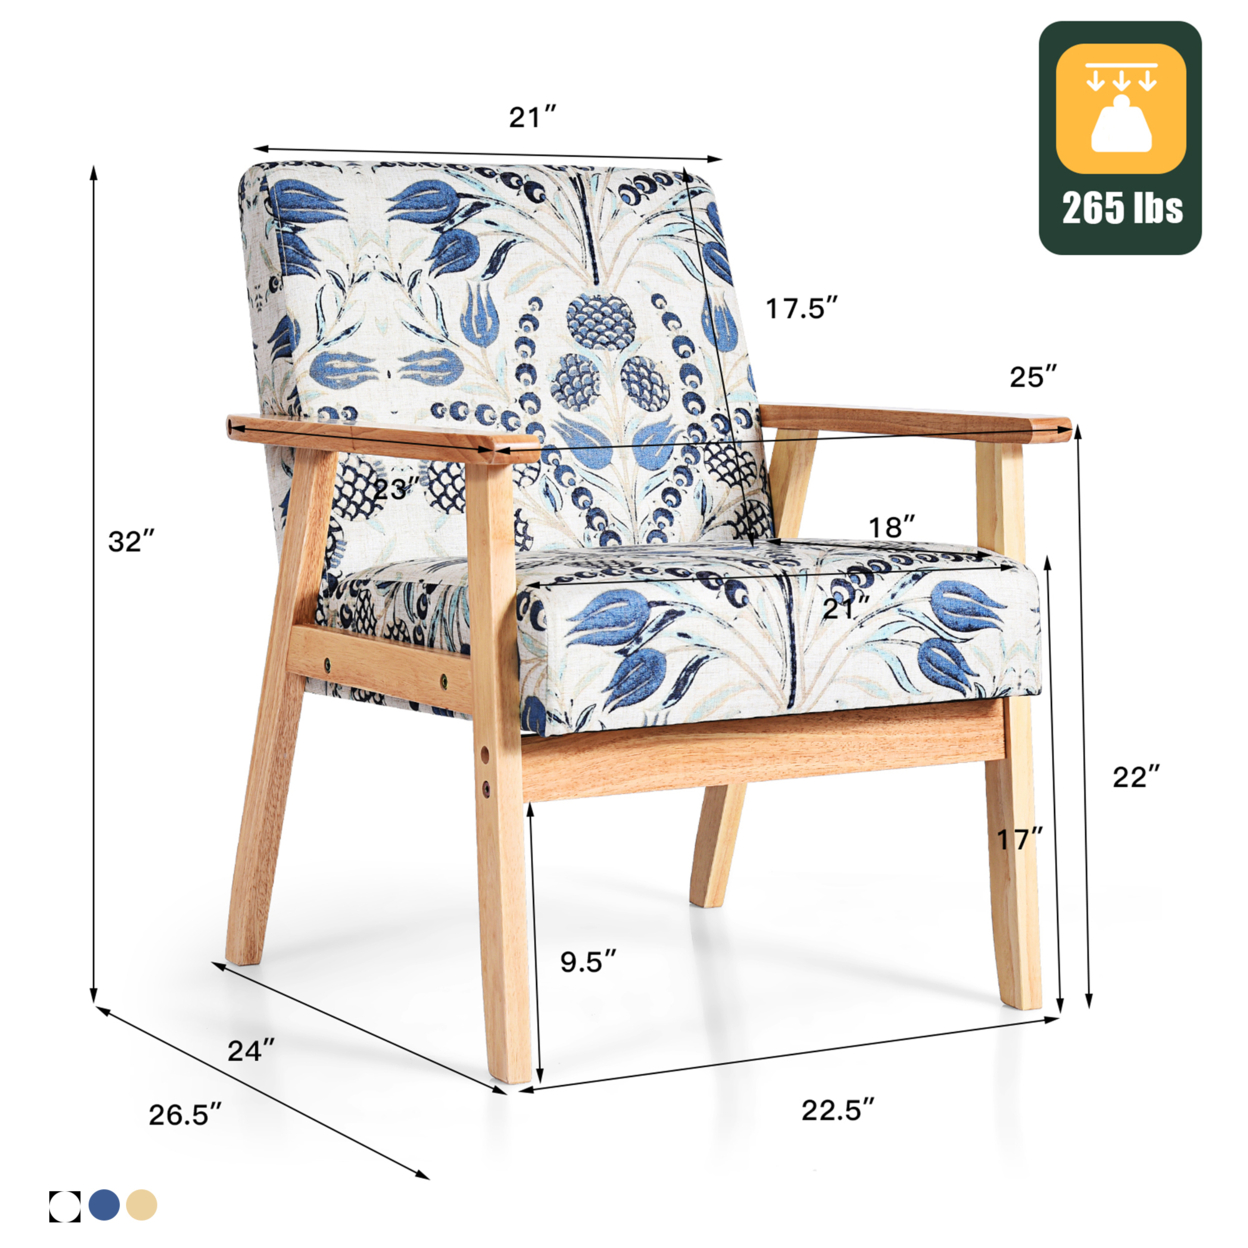 2PCS Accent Armchair Upholstered Chair Home Office W/ Wooden Frame White/Blue/Yellow - Yellow